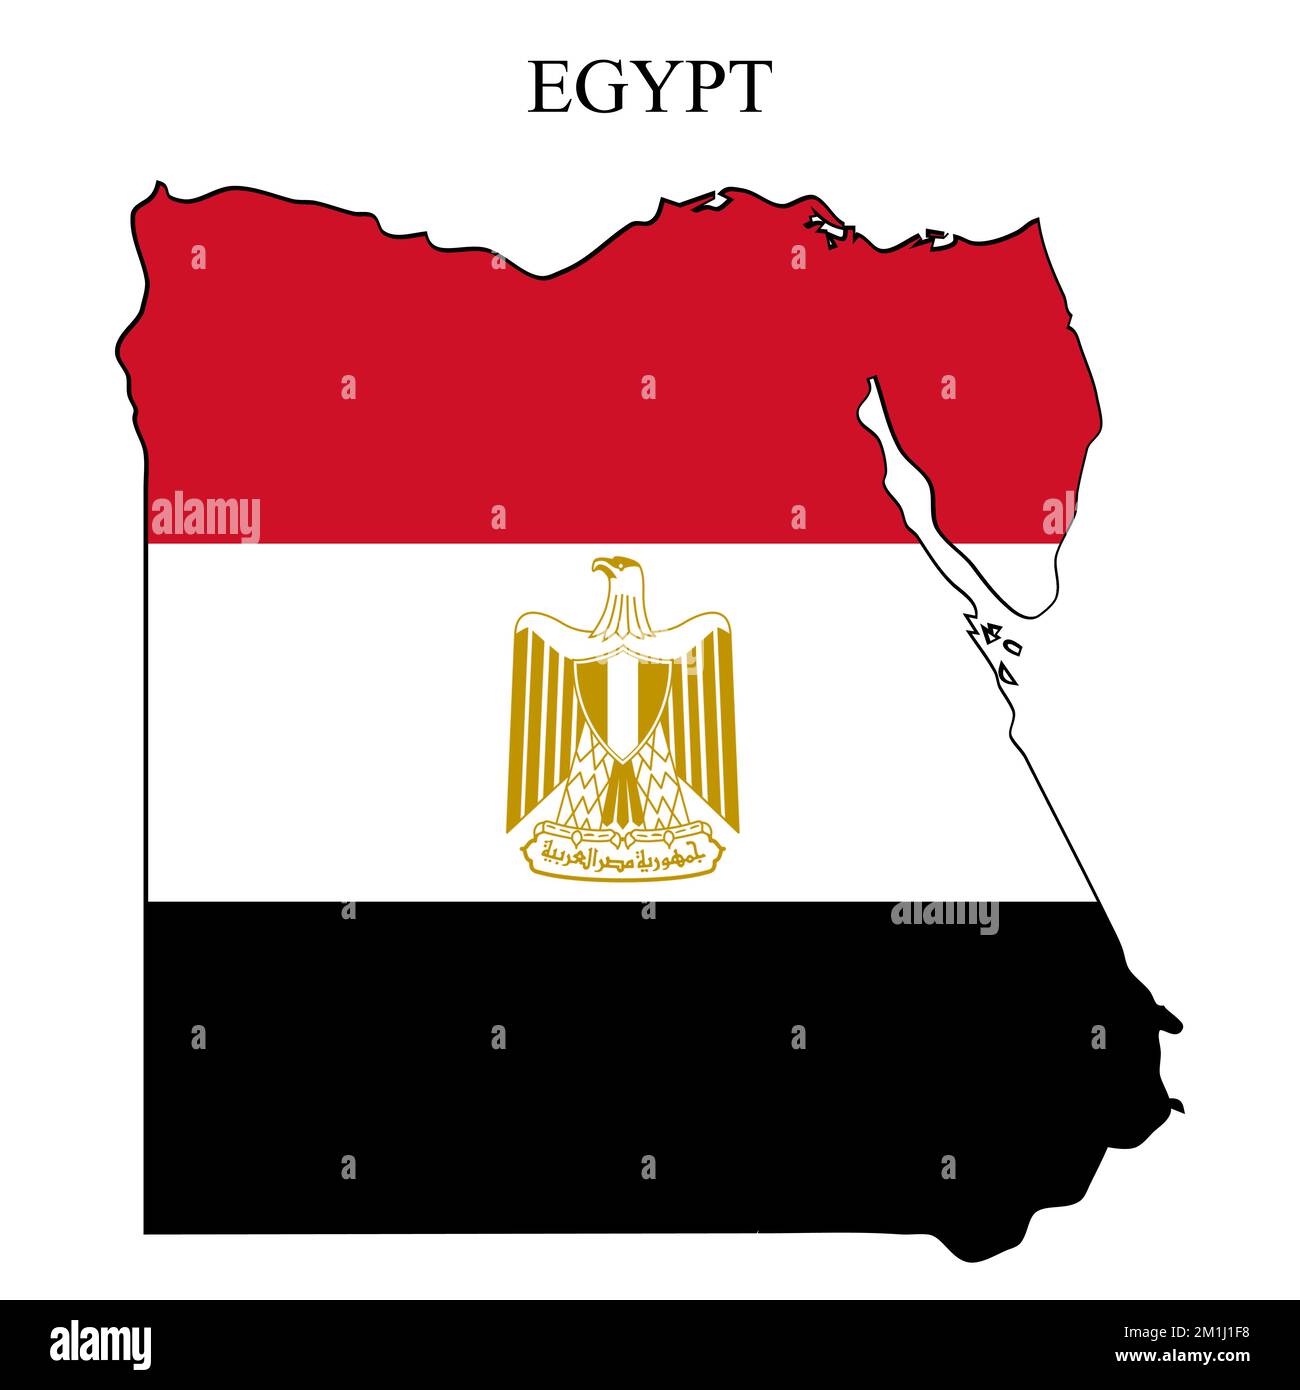 Egypt map vector illustration. Global economy. Famous country. Northern ...
